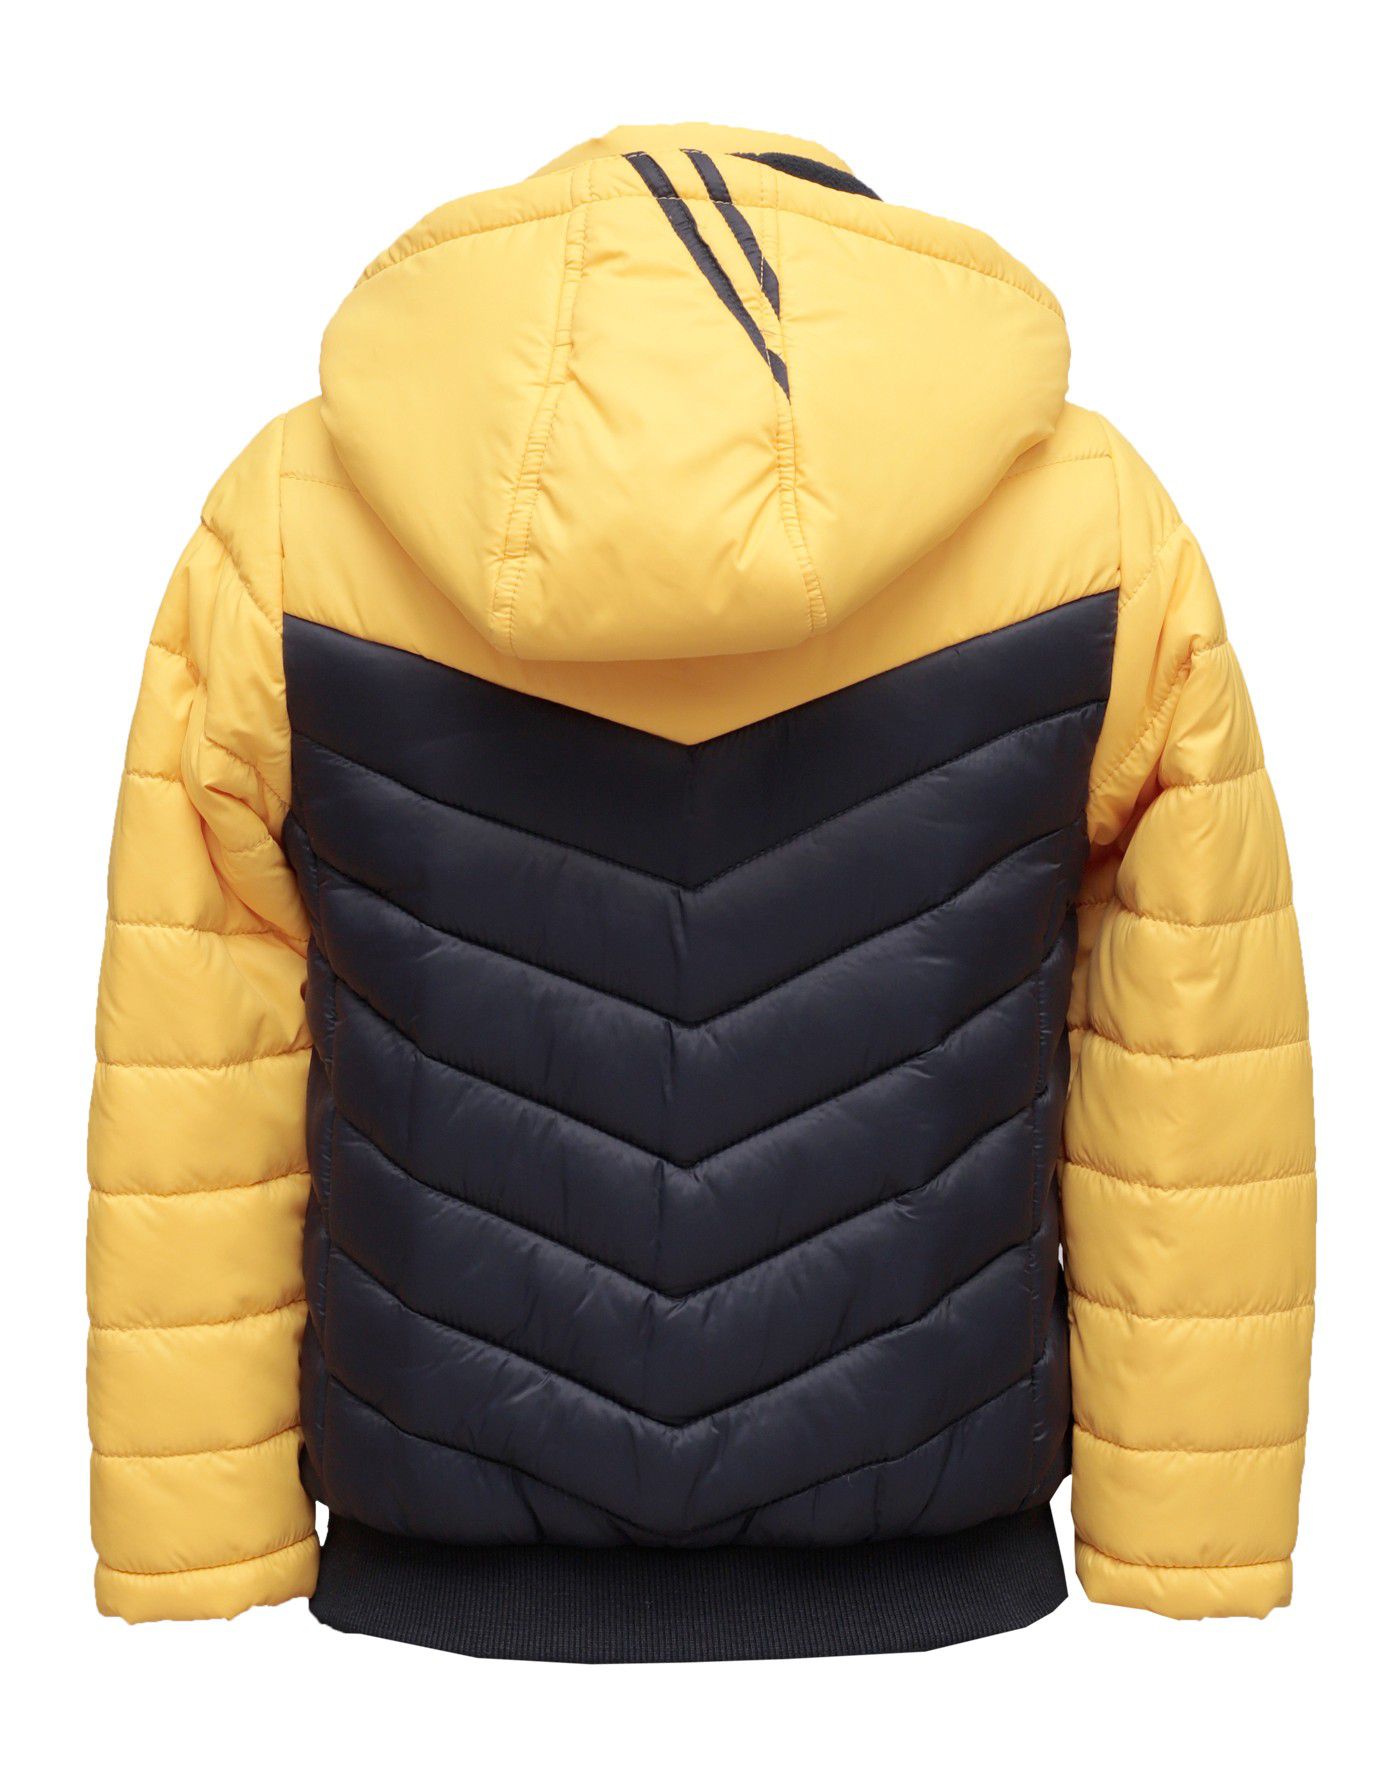 Shop Boys Jacket Yellow Quilted at Woollen Wear